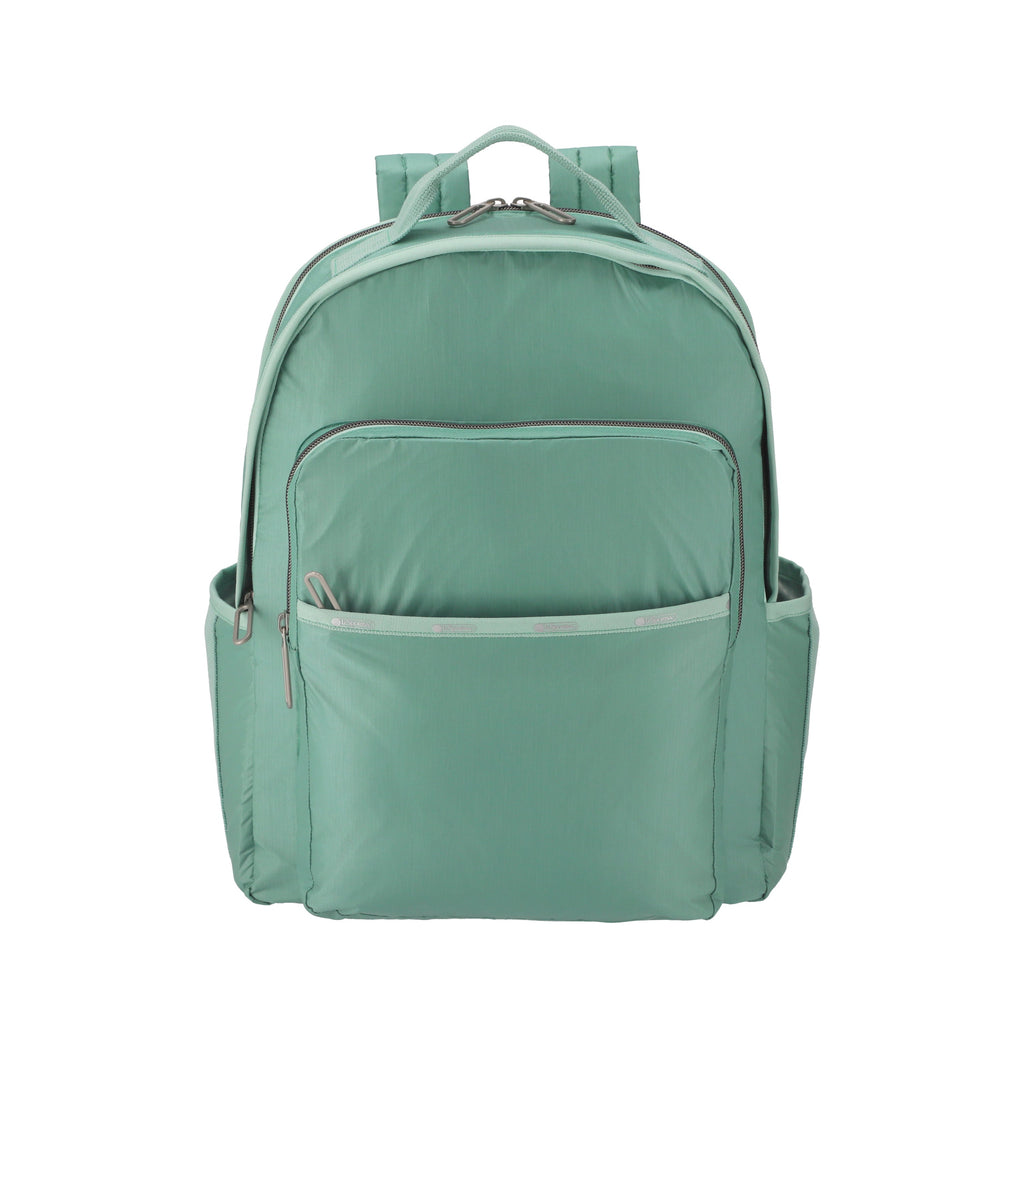 Essential Carryall Backpack - 24260255383600